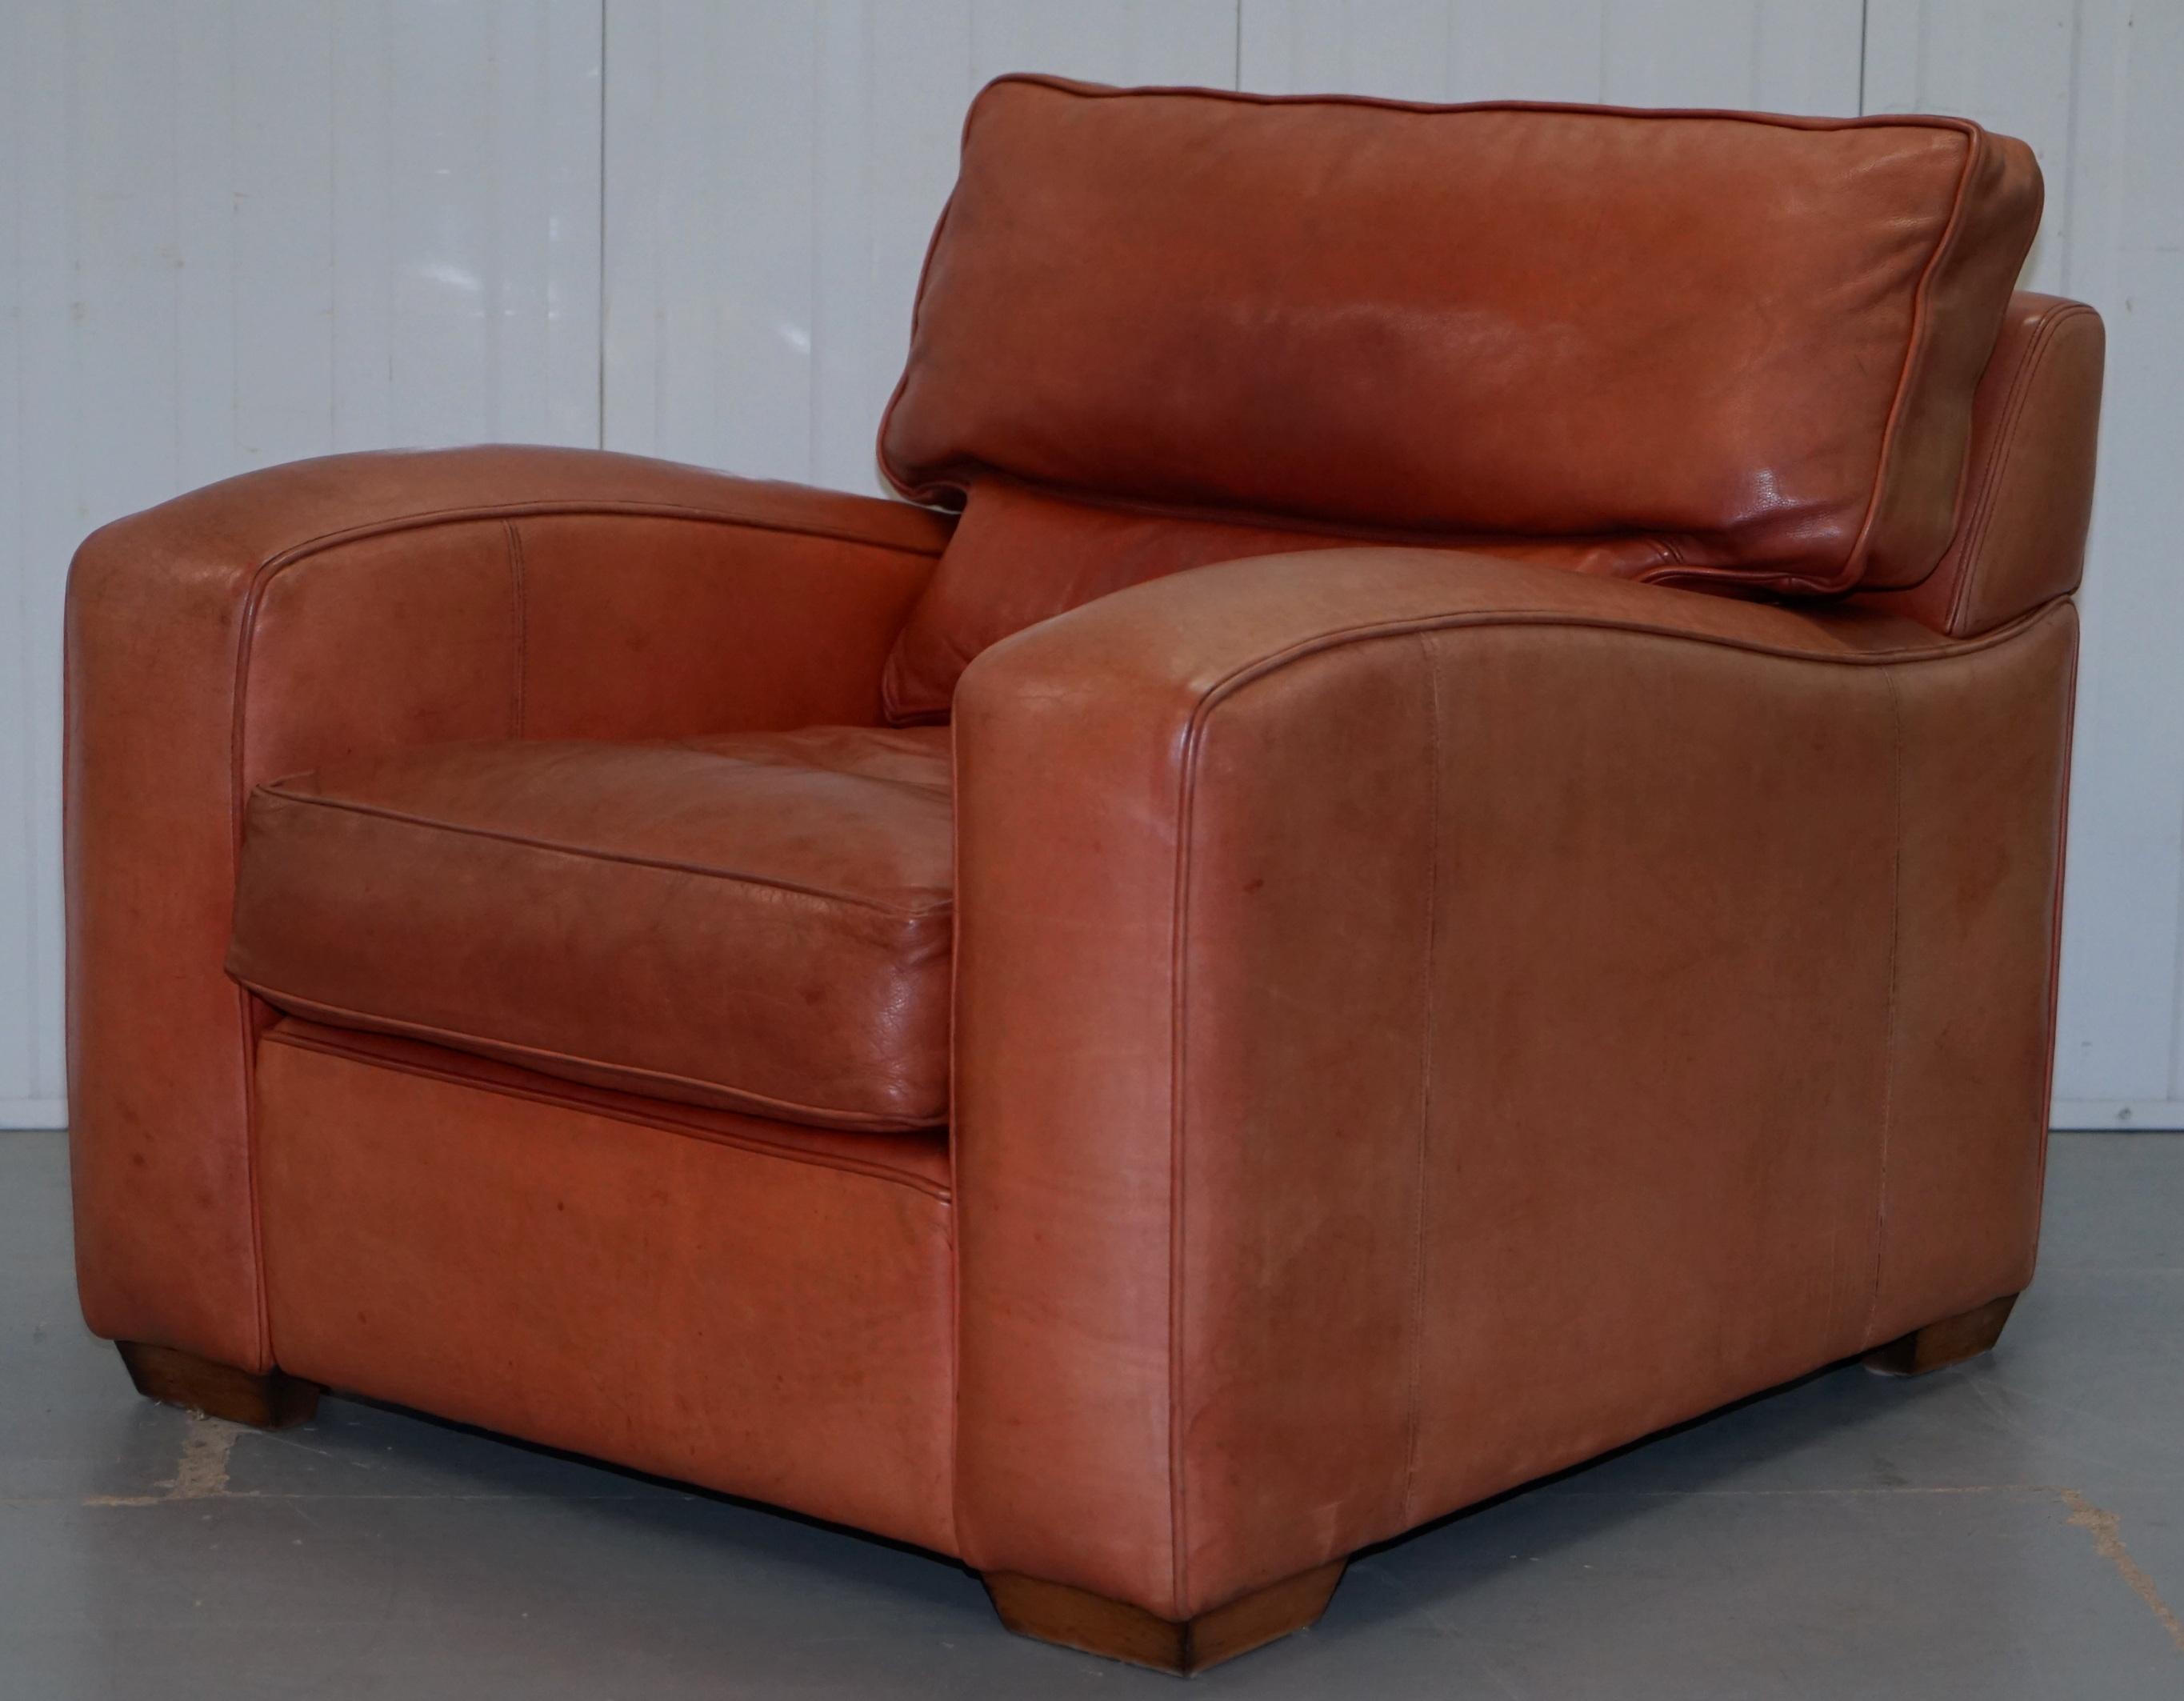 Duresta Panther Brown Leather Armchair and Oversized Plantation